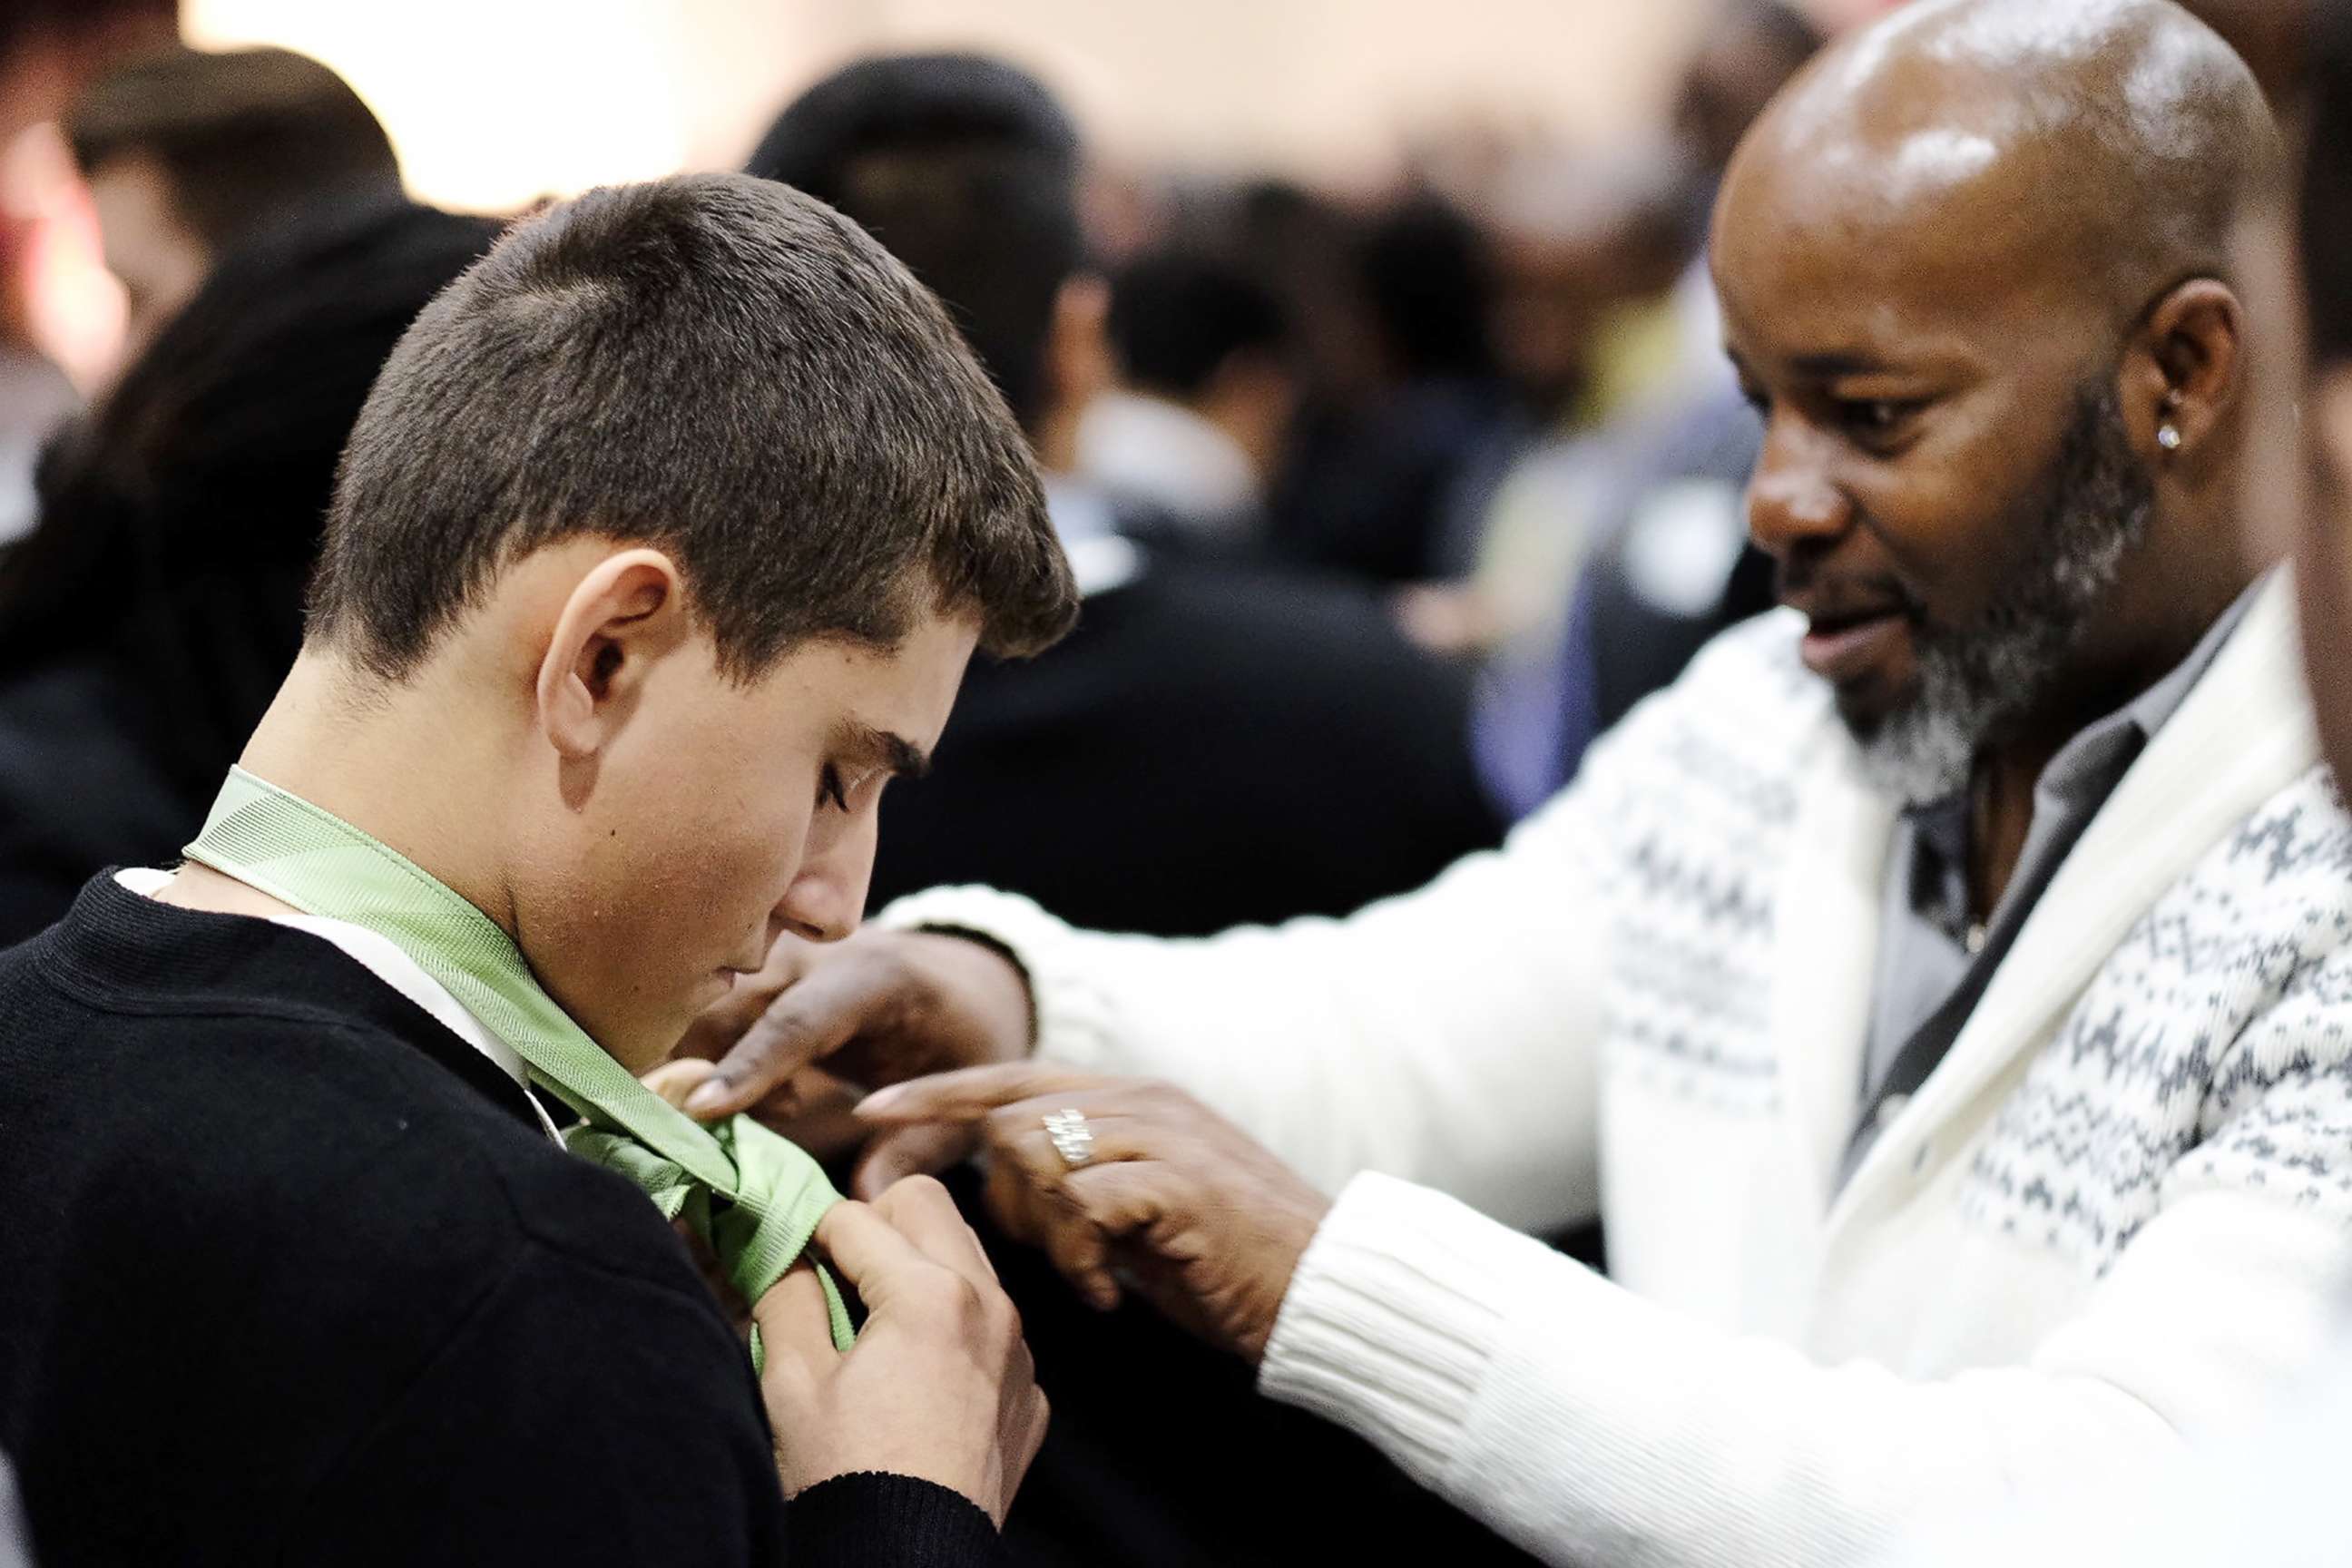 PHOTO: A mentor teaches a student to tie a tie at Billy Earl Dade Middle School's "Breakfast with Dads" event on Dec. 14, 2017.